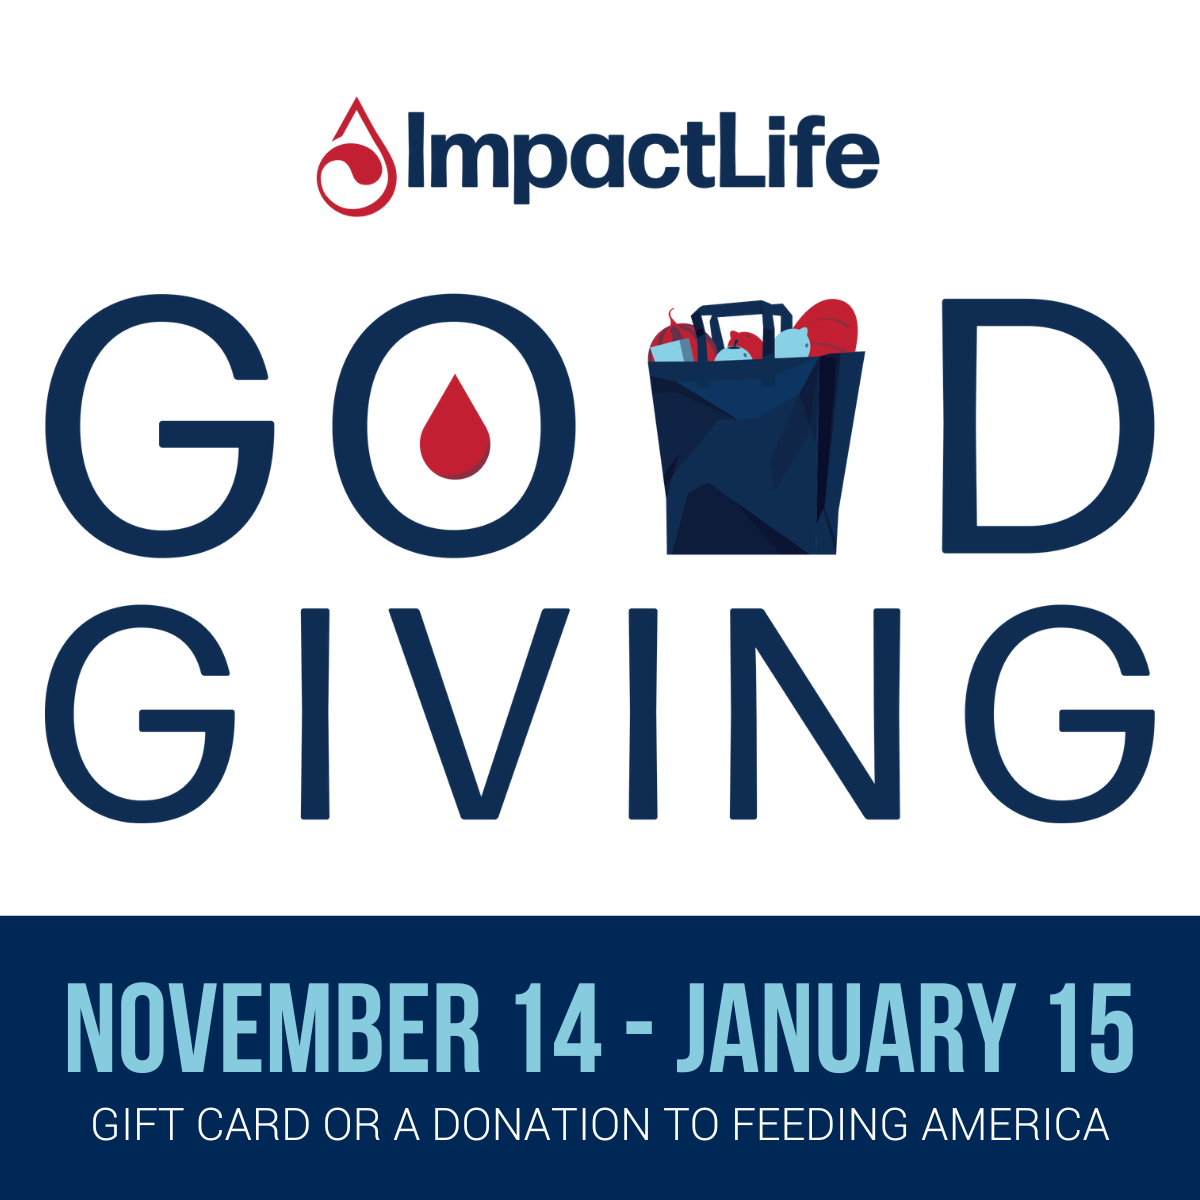 Donor Promotion: e-gift card or donation to Feeding America with donation